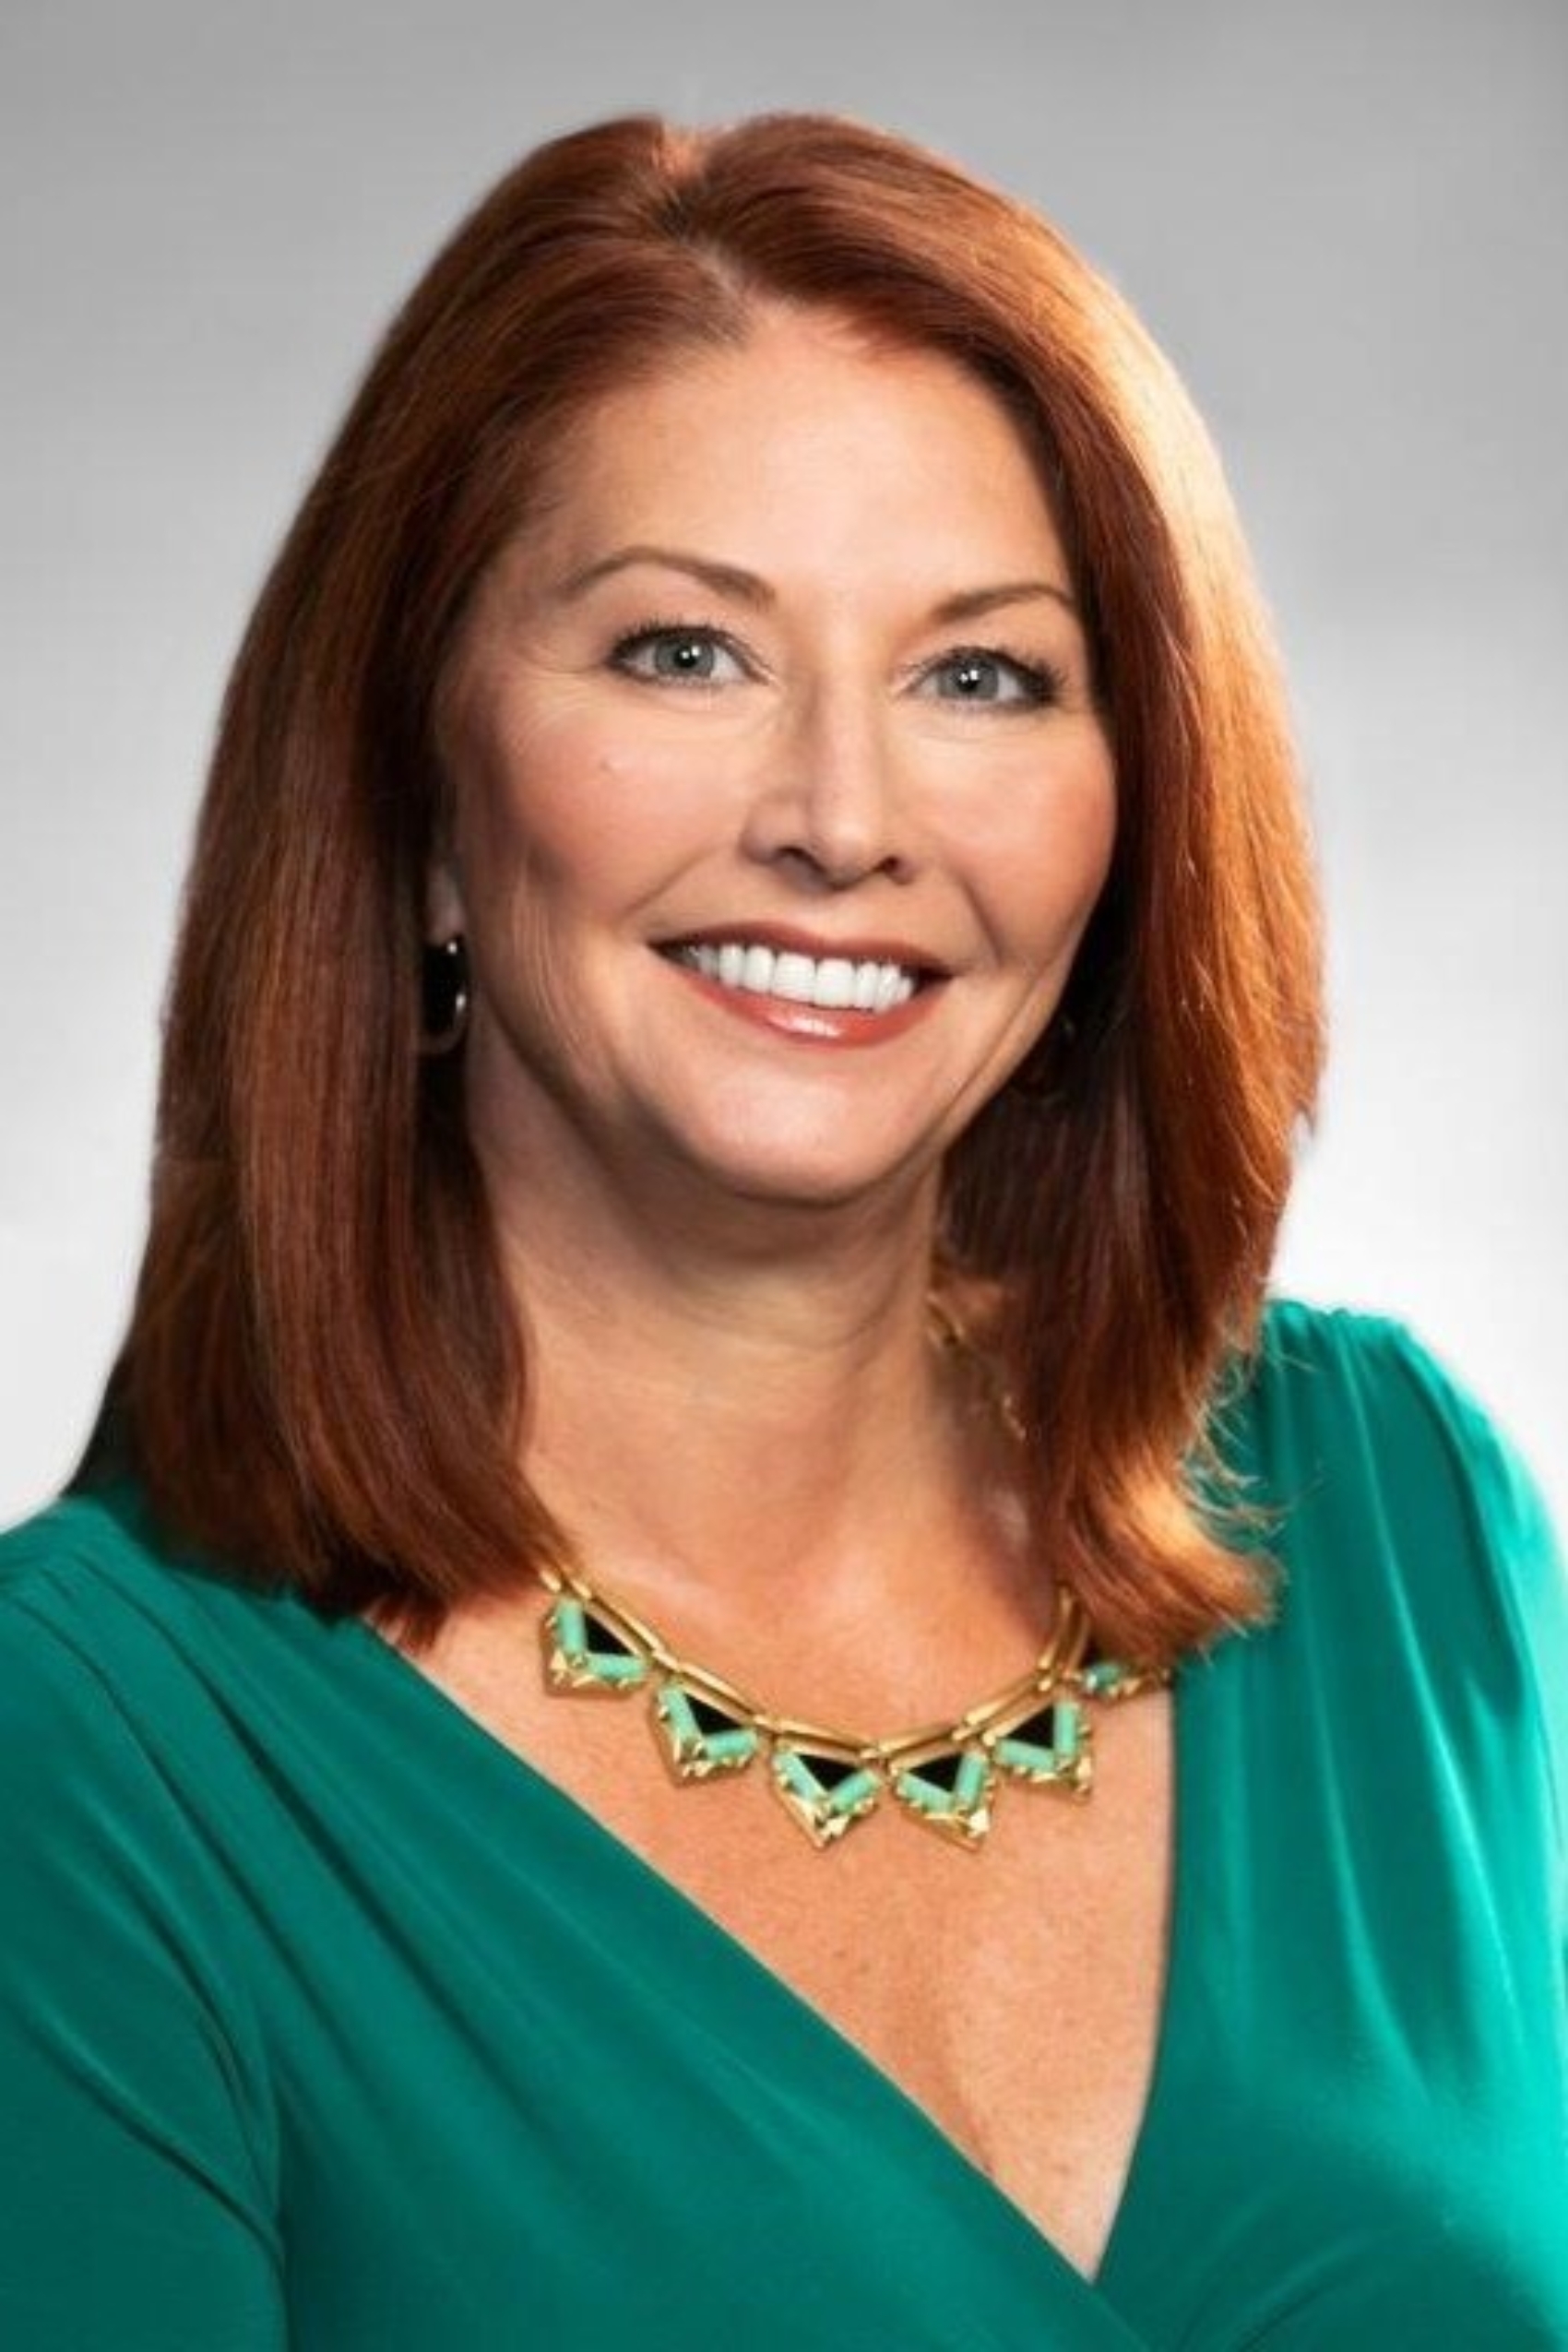 Lisa Morina is a woman with light skin and reddish hair who is smiling and wearing a green dress with a v neckline.